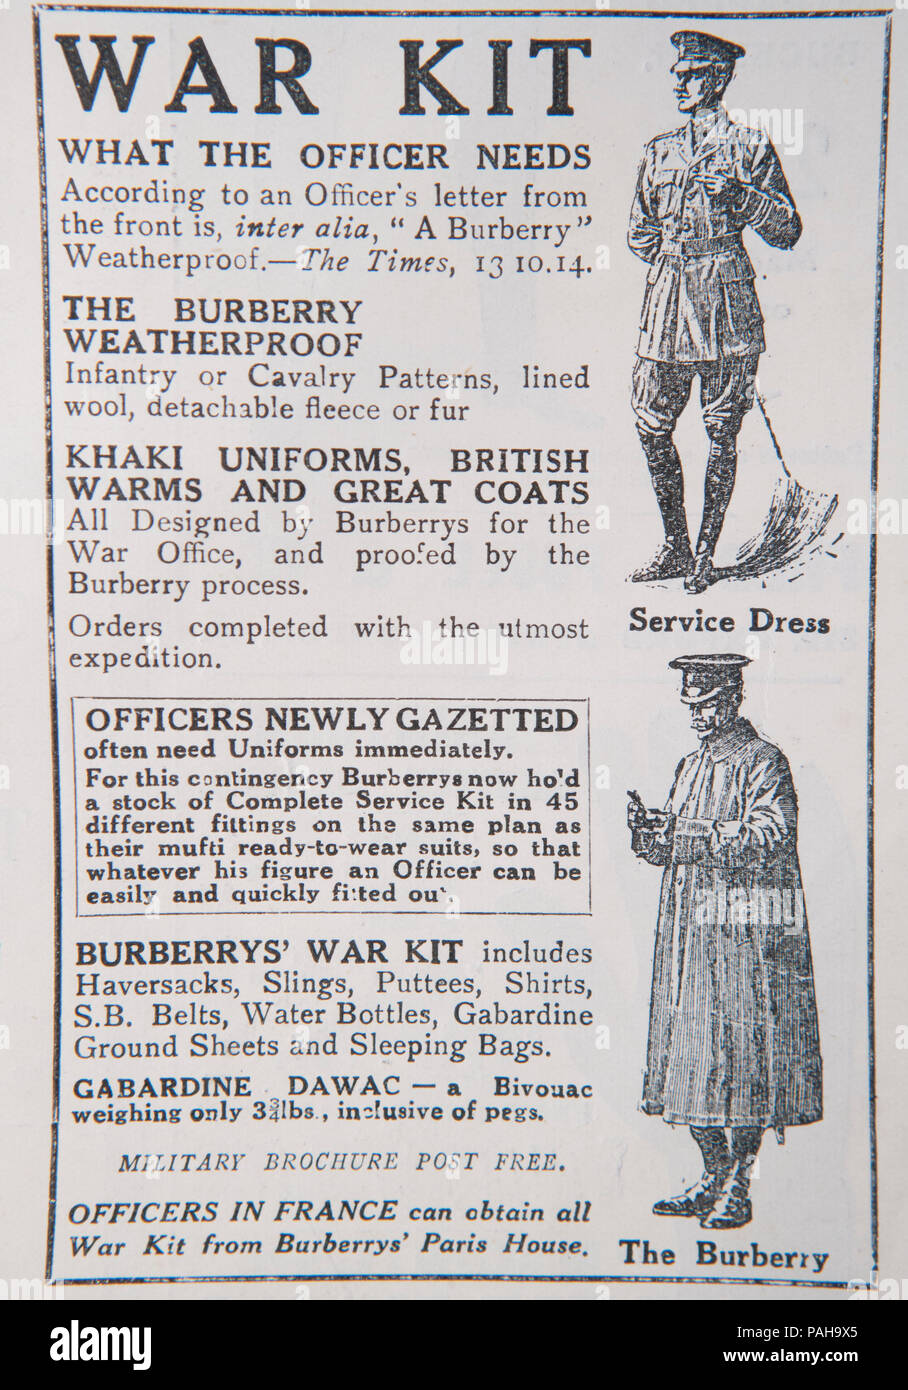 Burberry War Kit advert. From an old magazine during the 1914-1918 period.  UK GB Stock Photo - Alamy